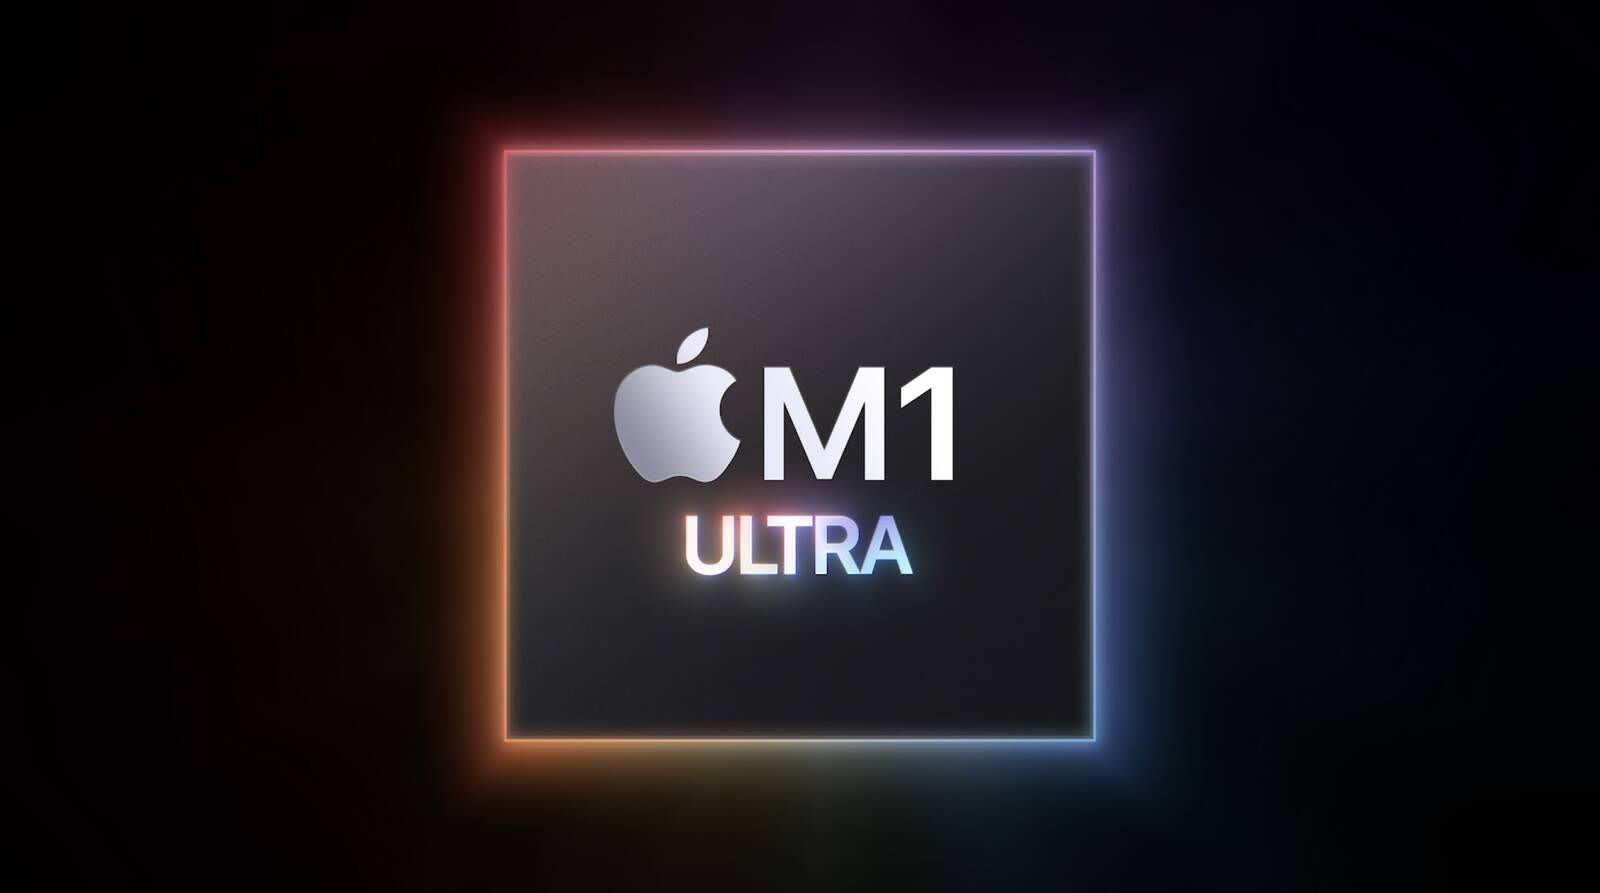 Apple M1 Ultra benchmarks put it ahead of Core i9-12900K and Xeon W, close to Threadripper 3990X